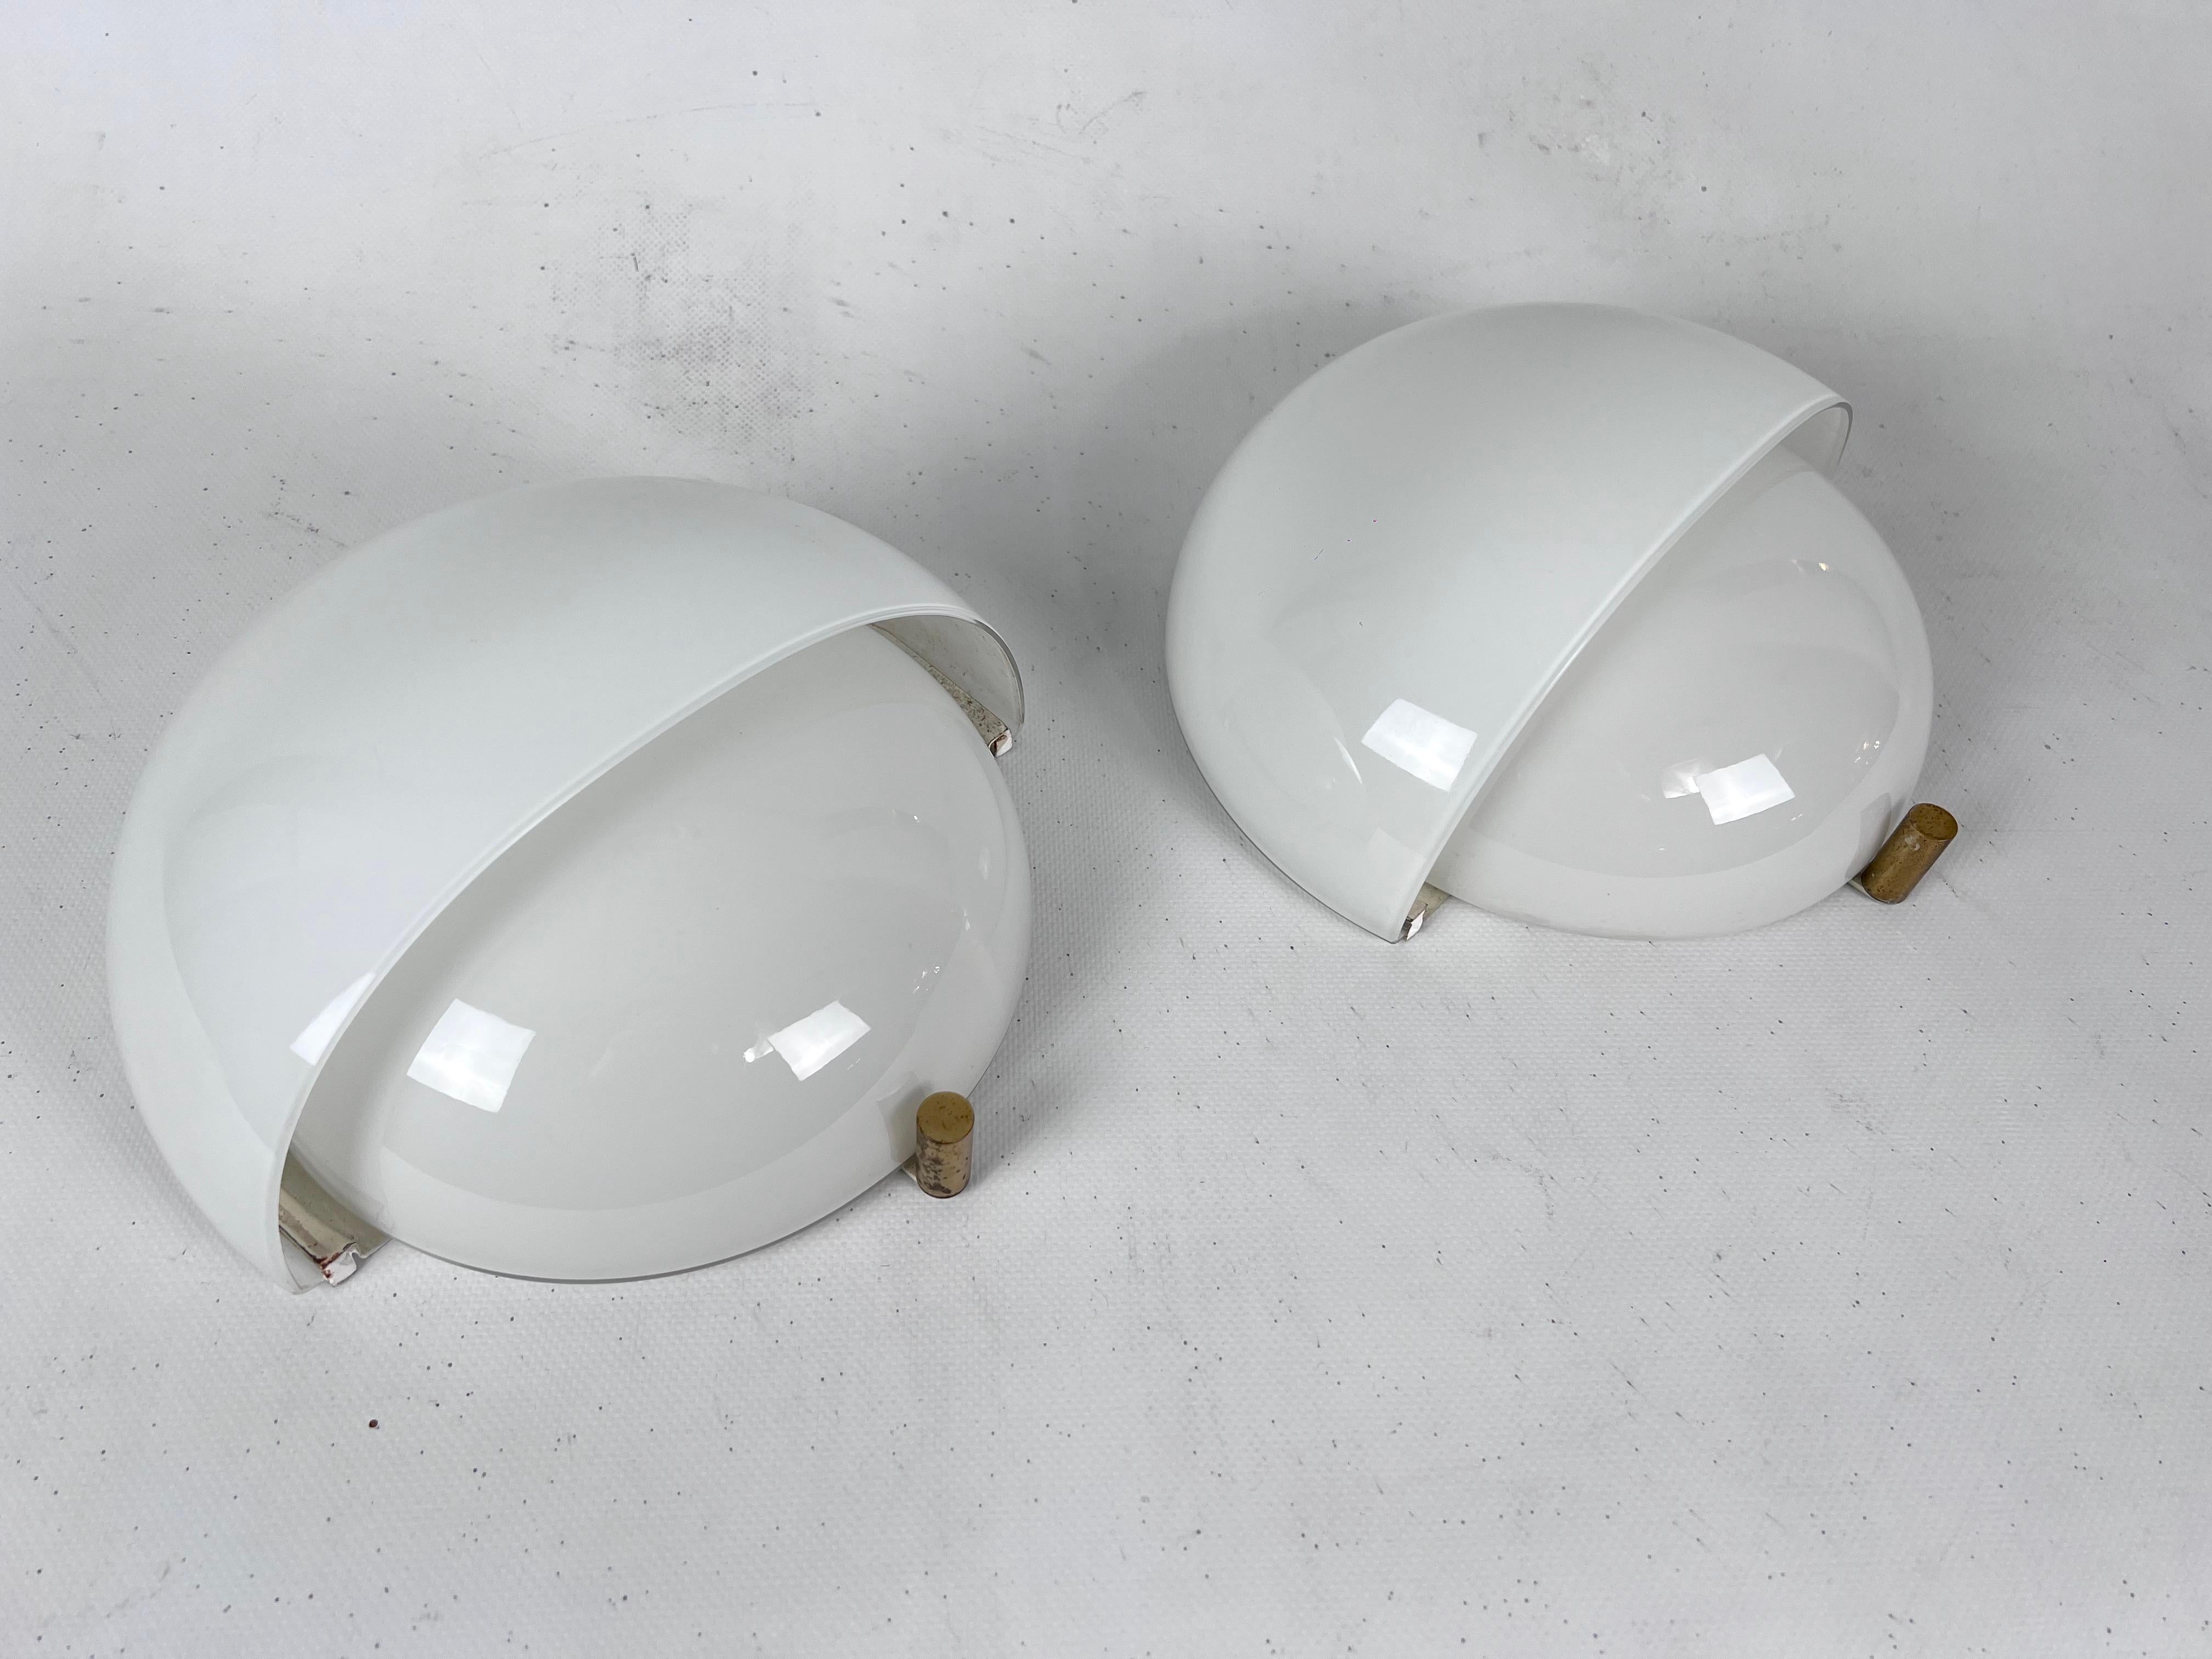 Metal Rare Pair of Glass Mania Sconces by Vico Magistretti for Artemide, 1960s